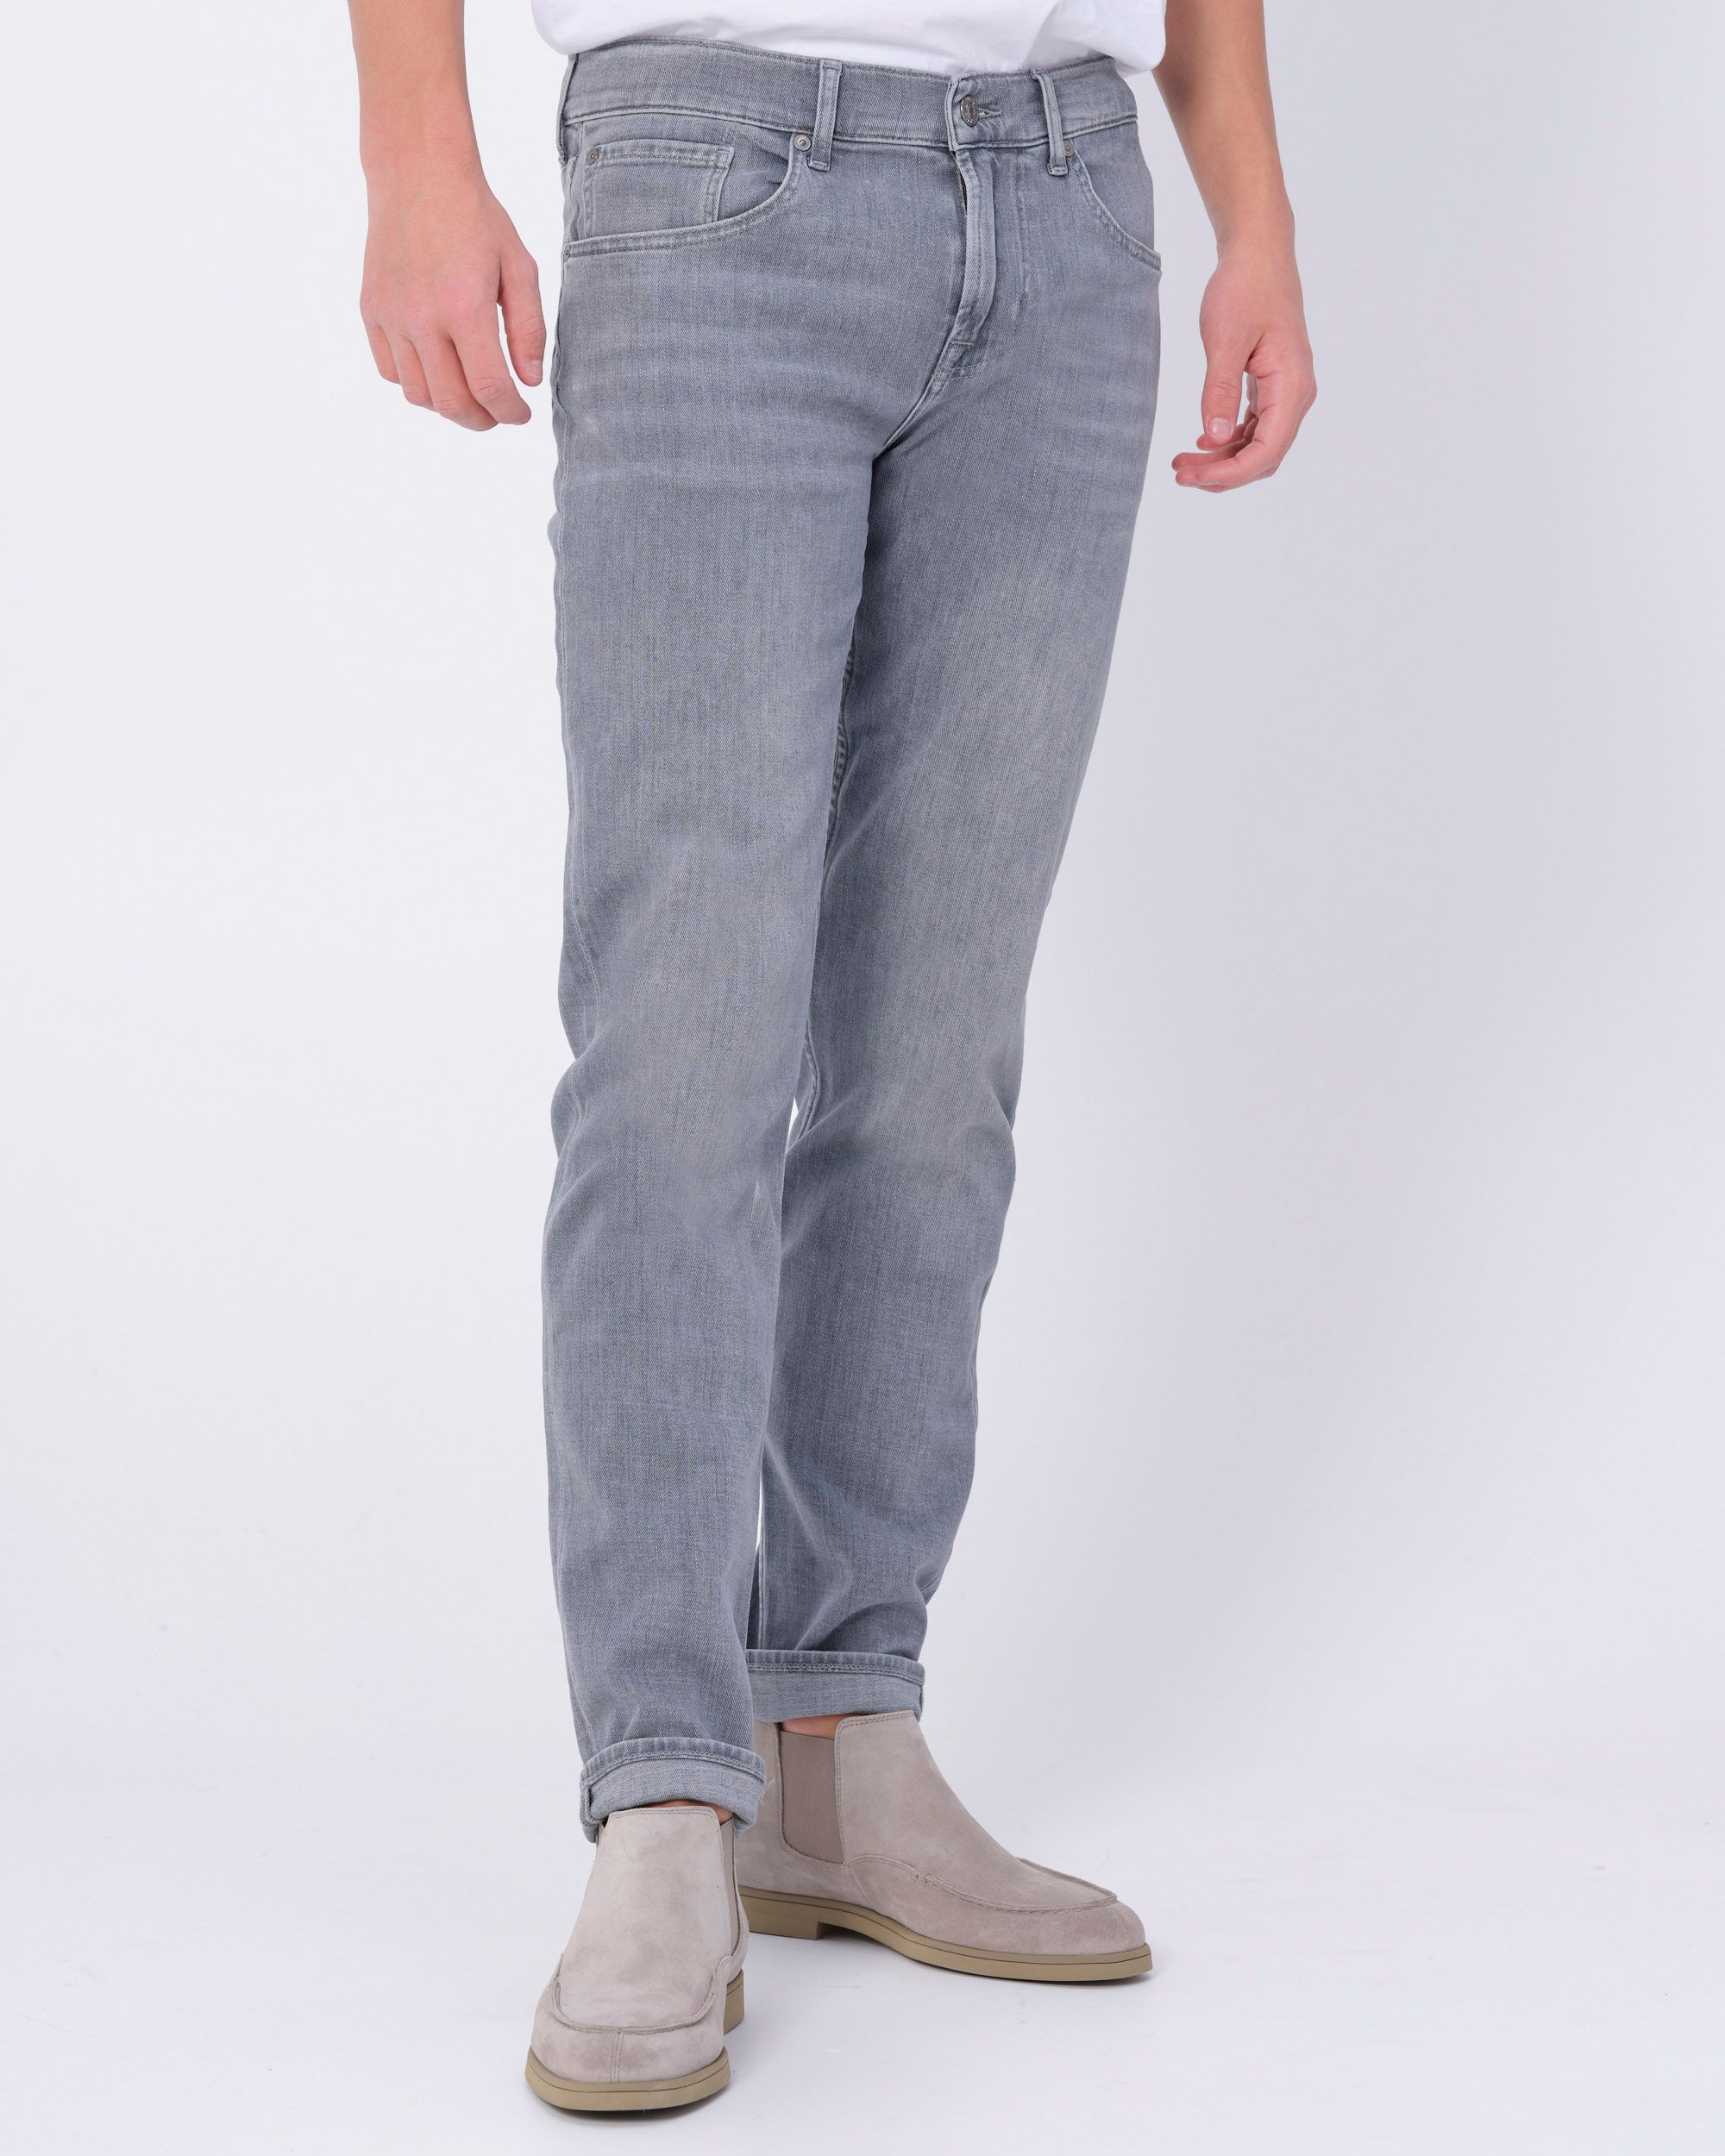 Seven for all mankind Jeans Licht grijs 083798-001-30